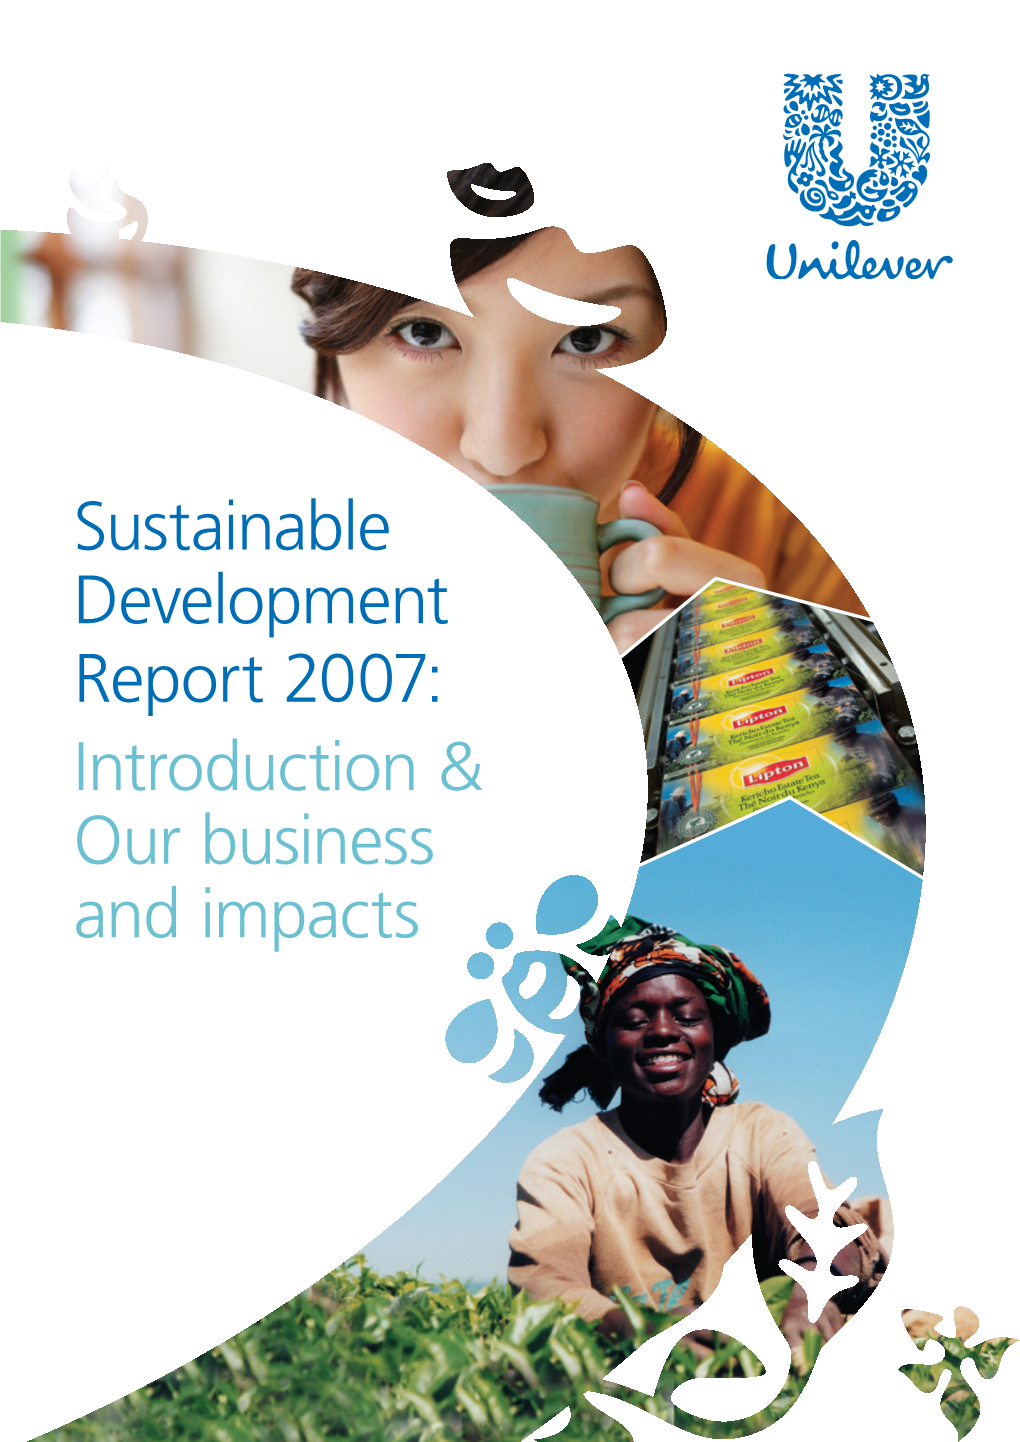 Sustainable Development Report 2007: Introduction & Our